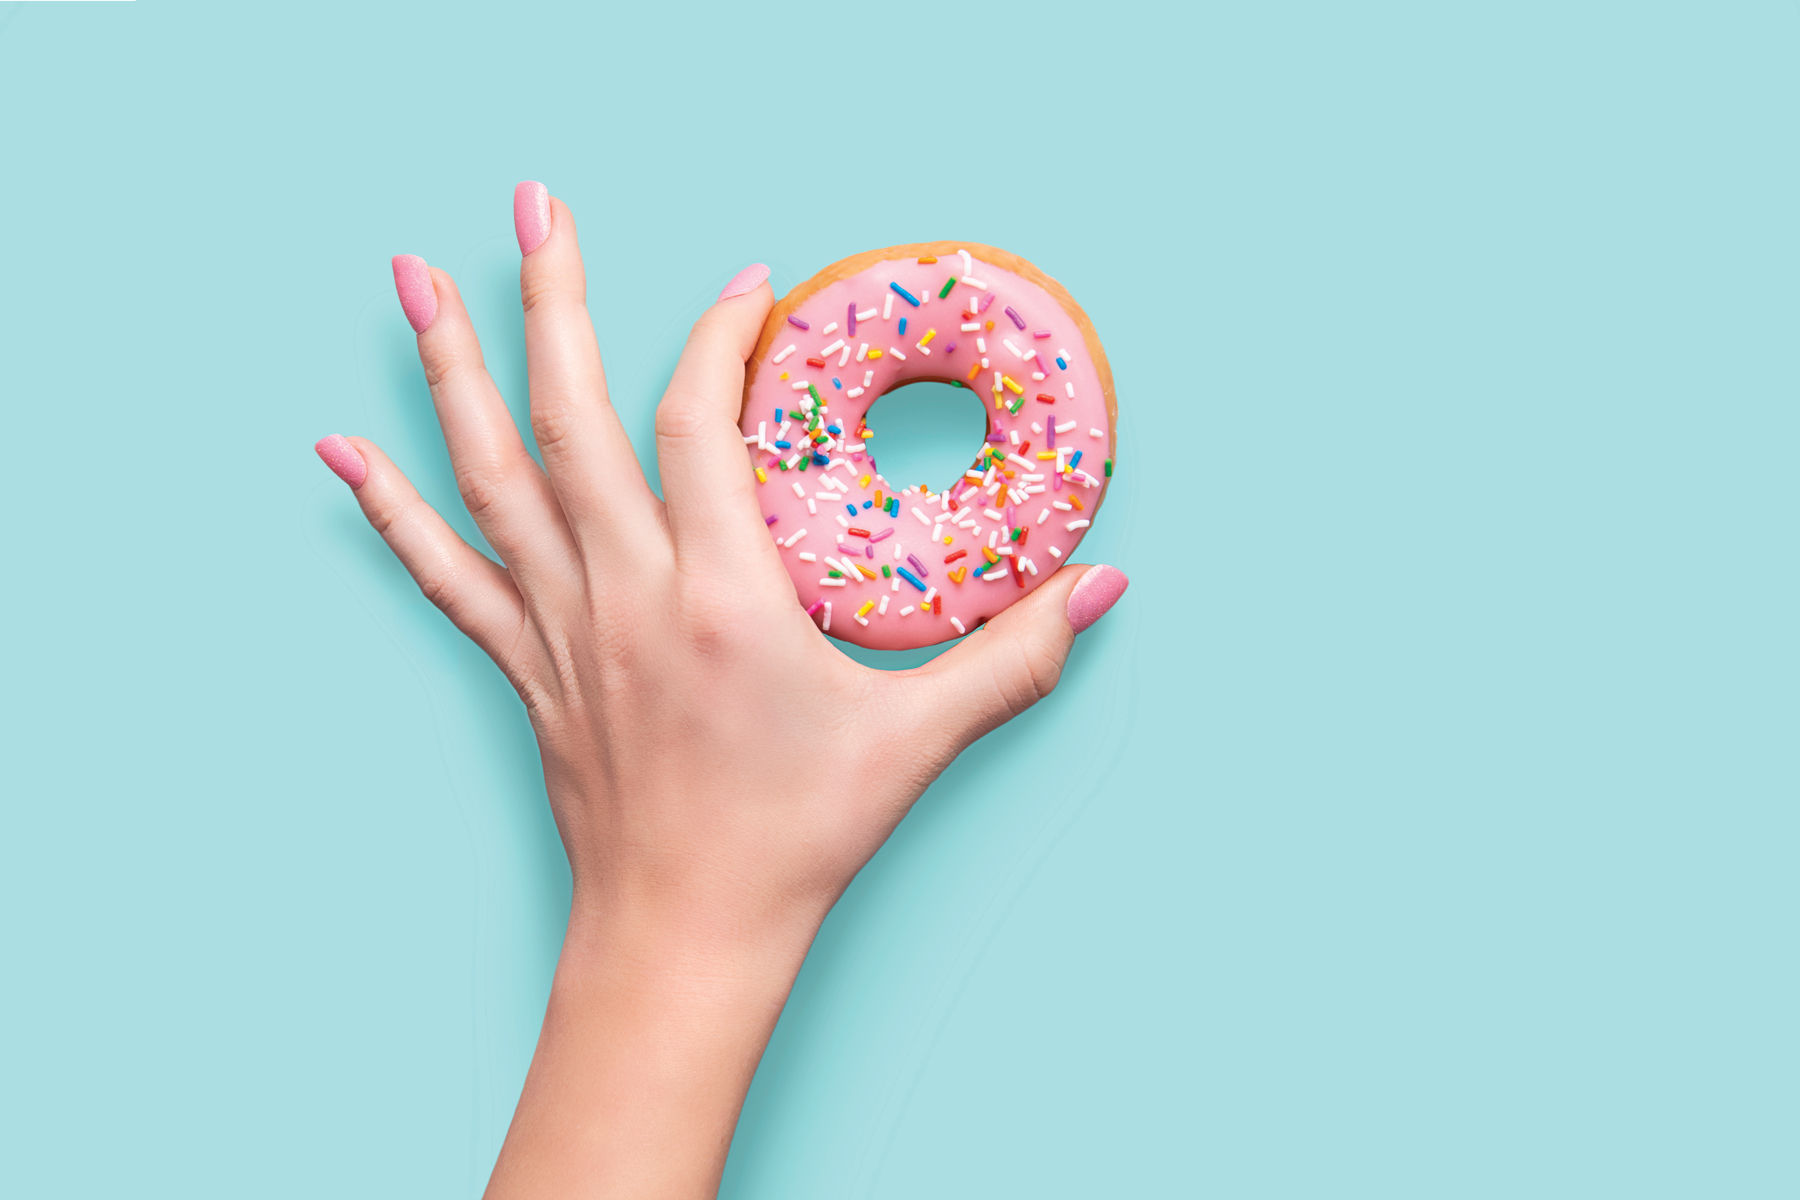 color changing press on nails and a hand holding a pink frosted donut